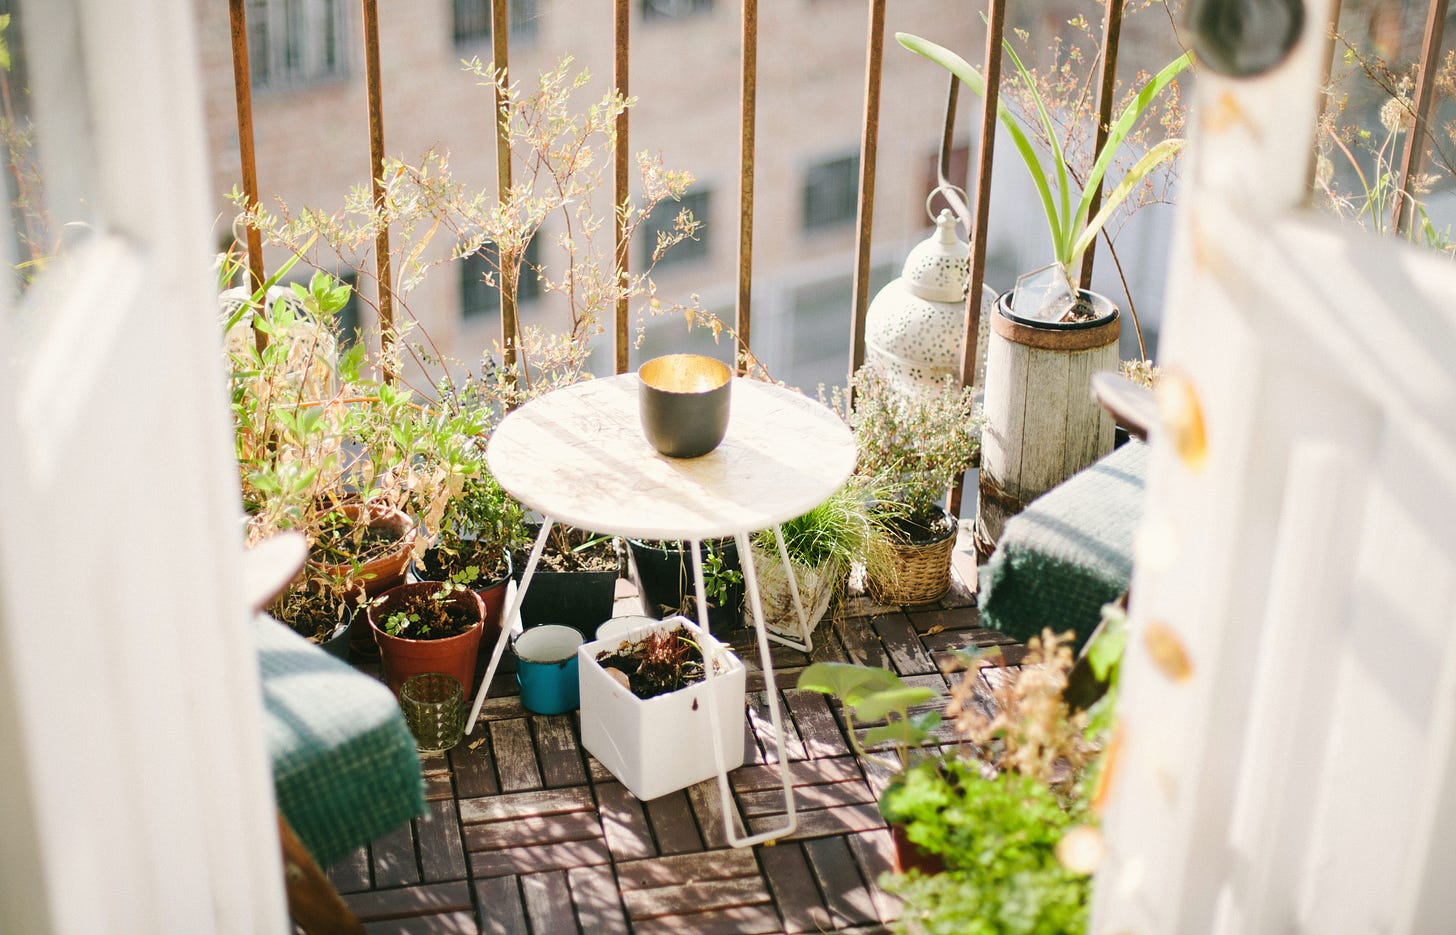 Smallbalcony full of plants with one table and a candle